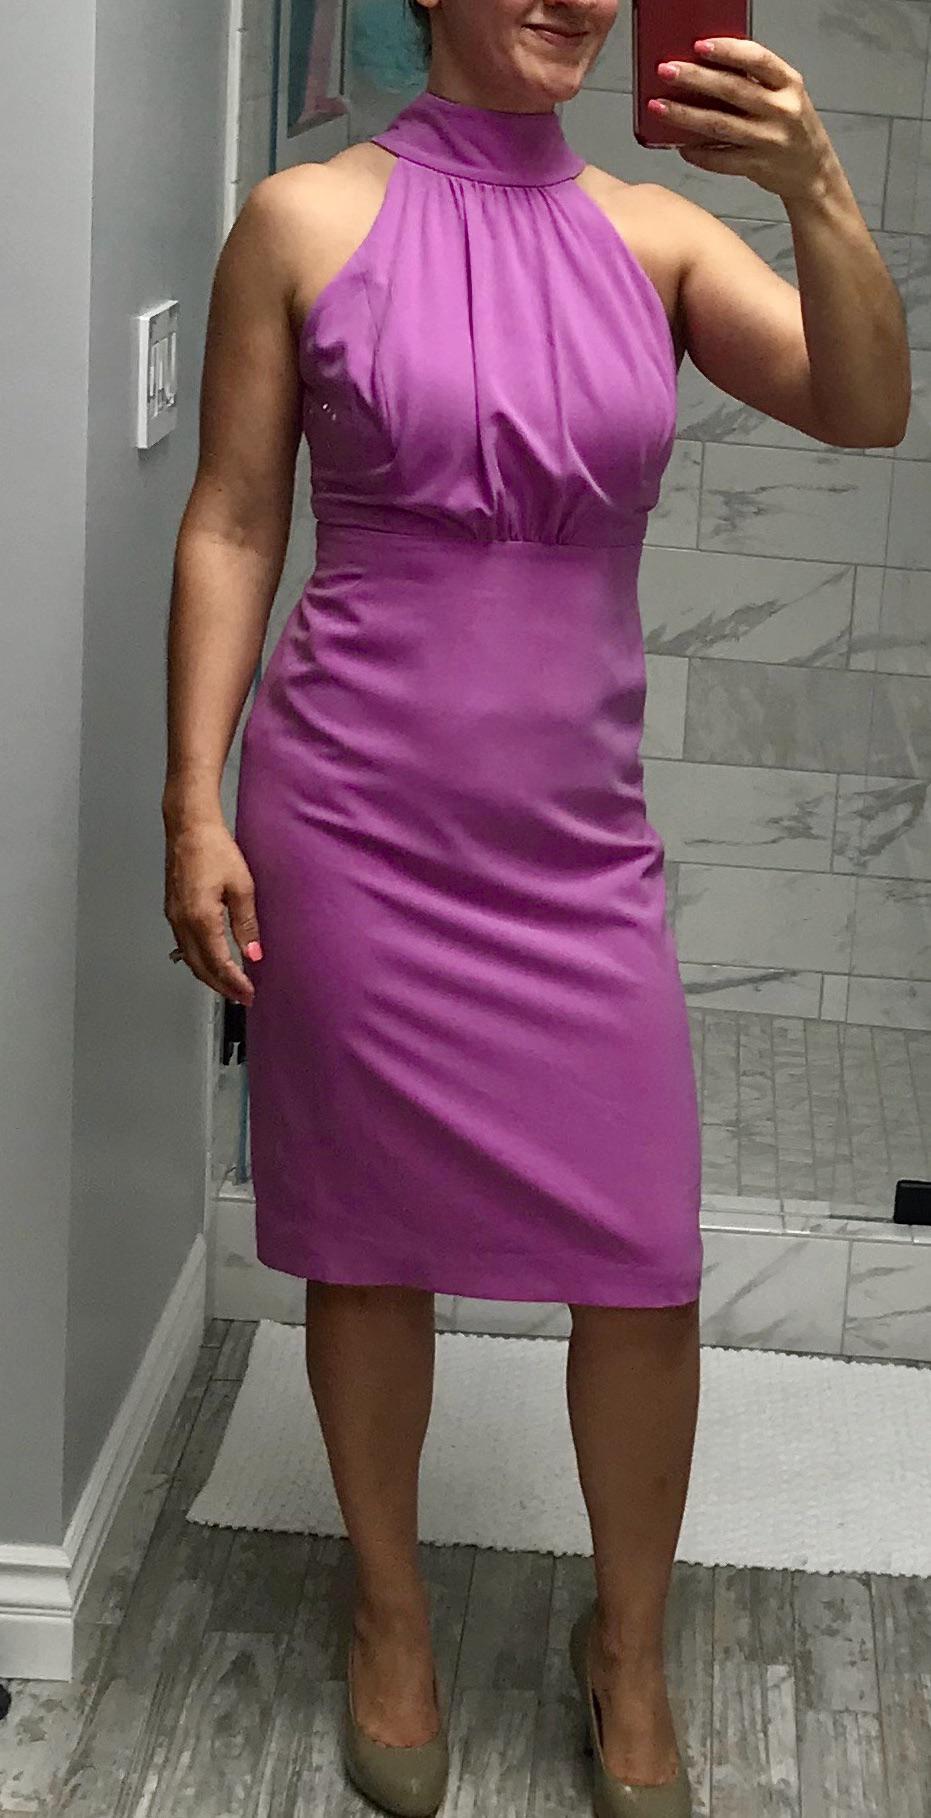 Is mommy sexy in this dress?